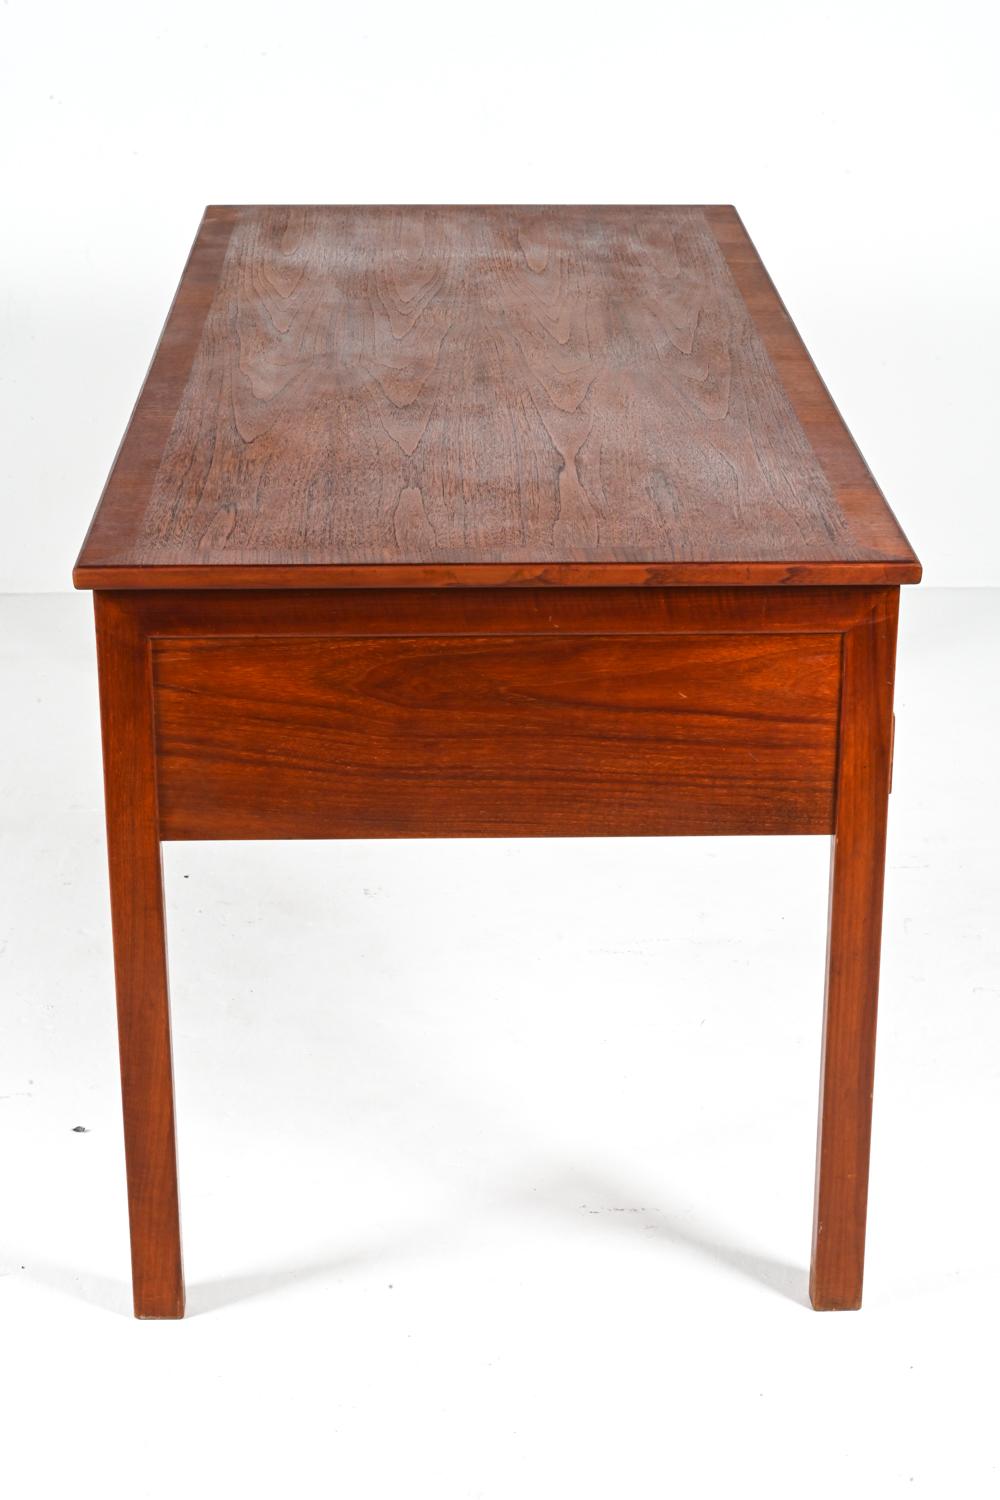 Danish Mahogany Executive Writing Desk by Ole Wanscher, c. 1950's For Sale 13